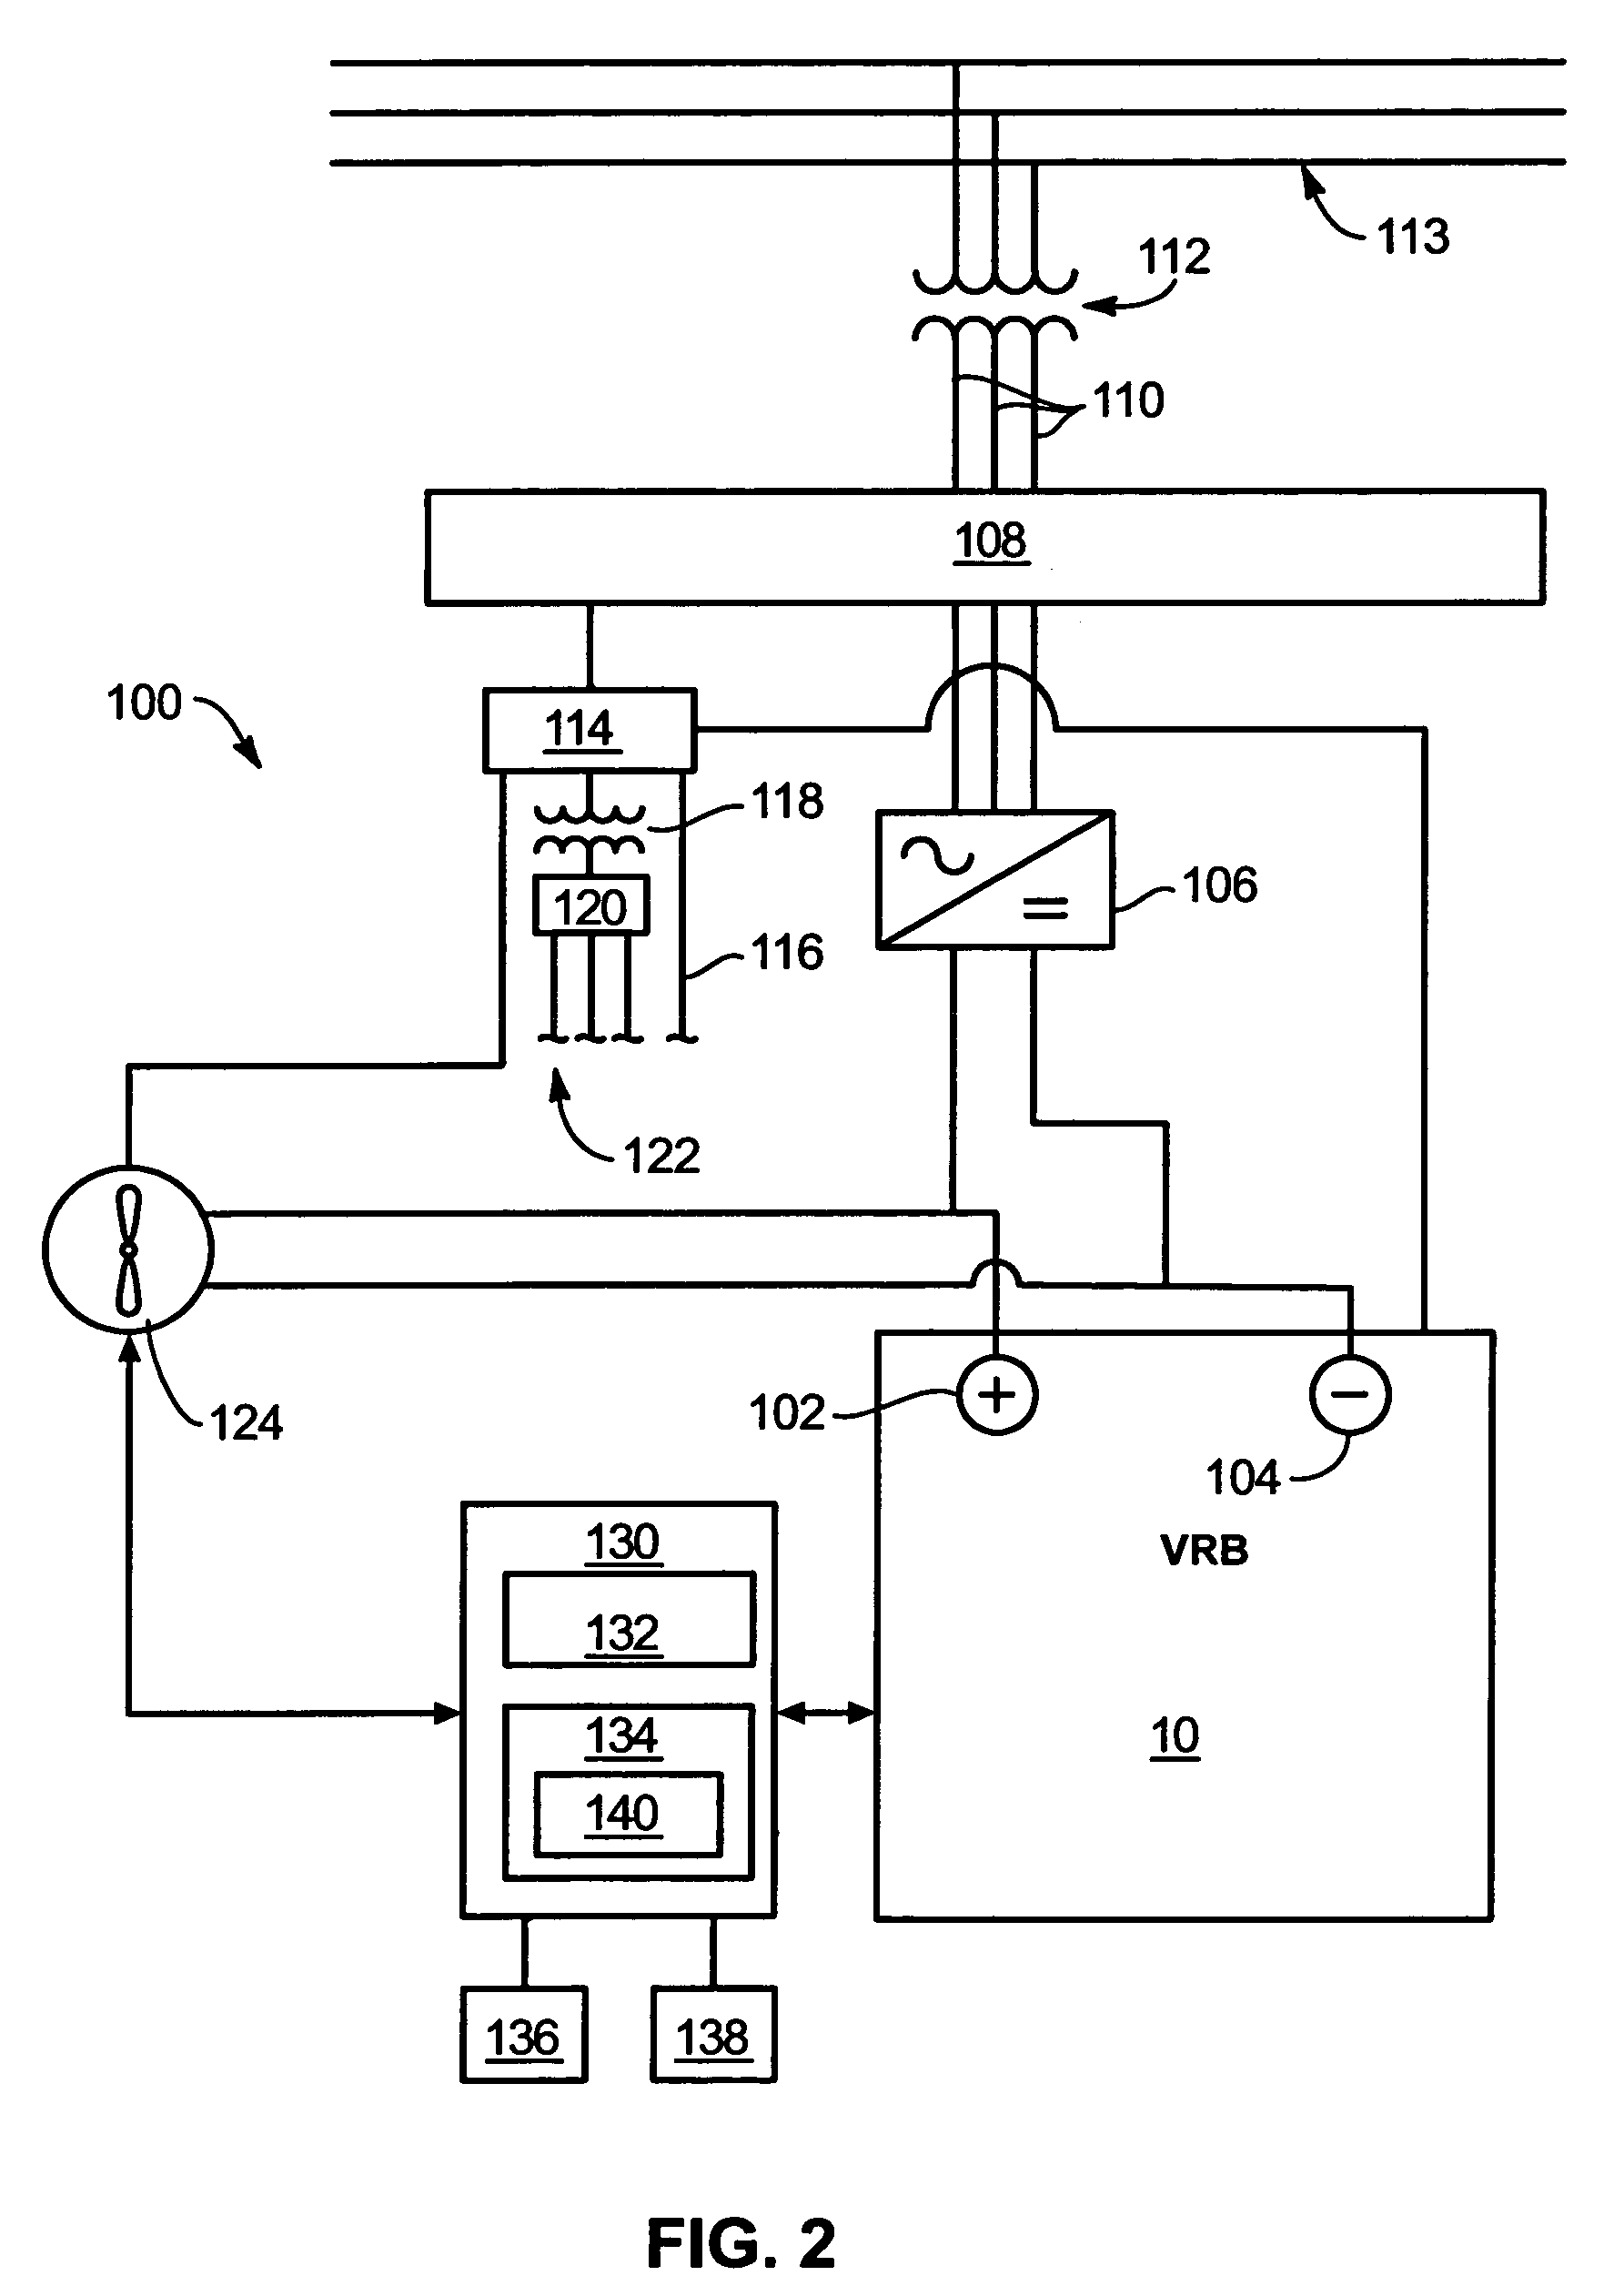 Power generation system incorporating a vanadium redox battery and a direct current wind turbine generator